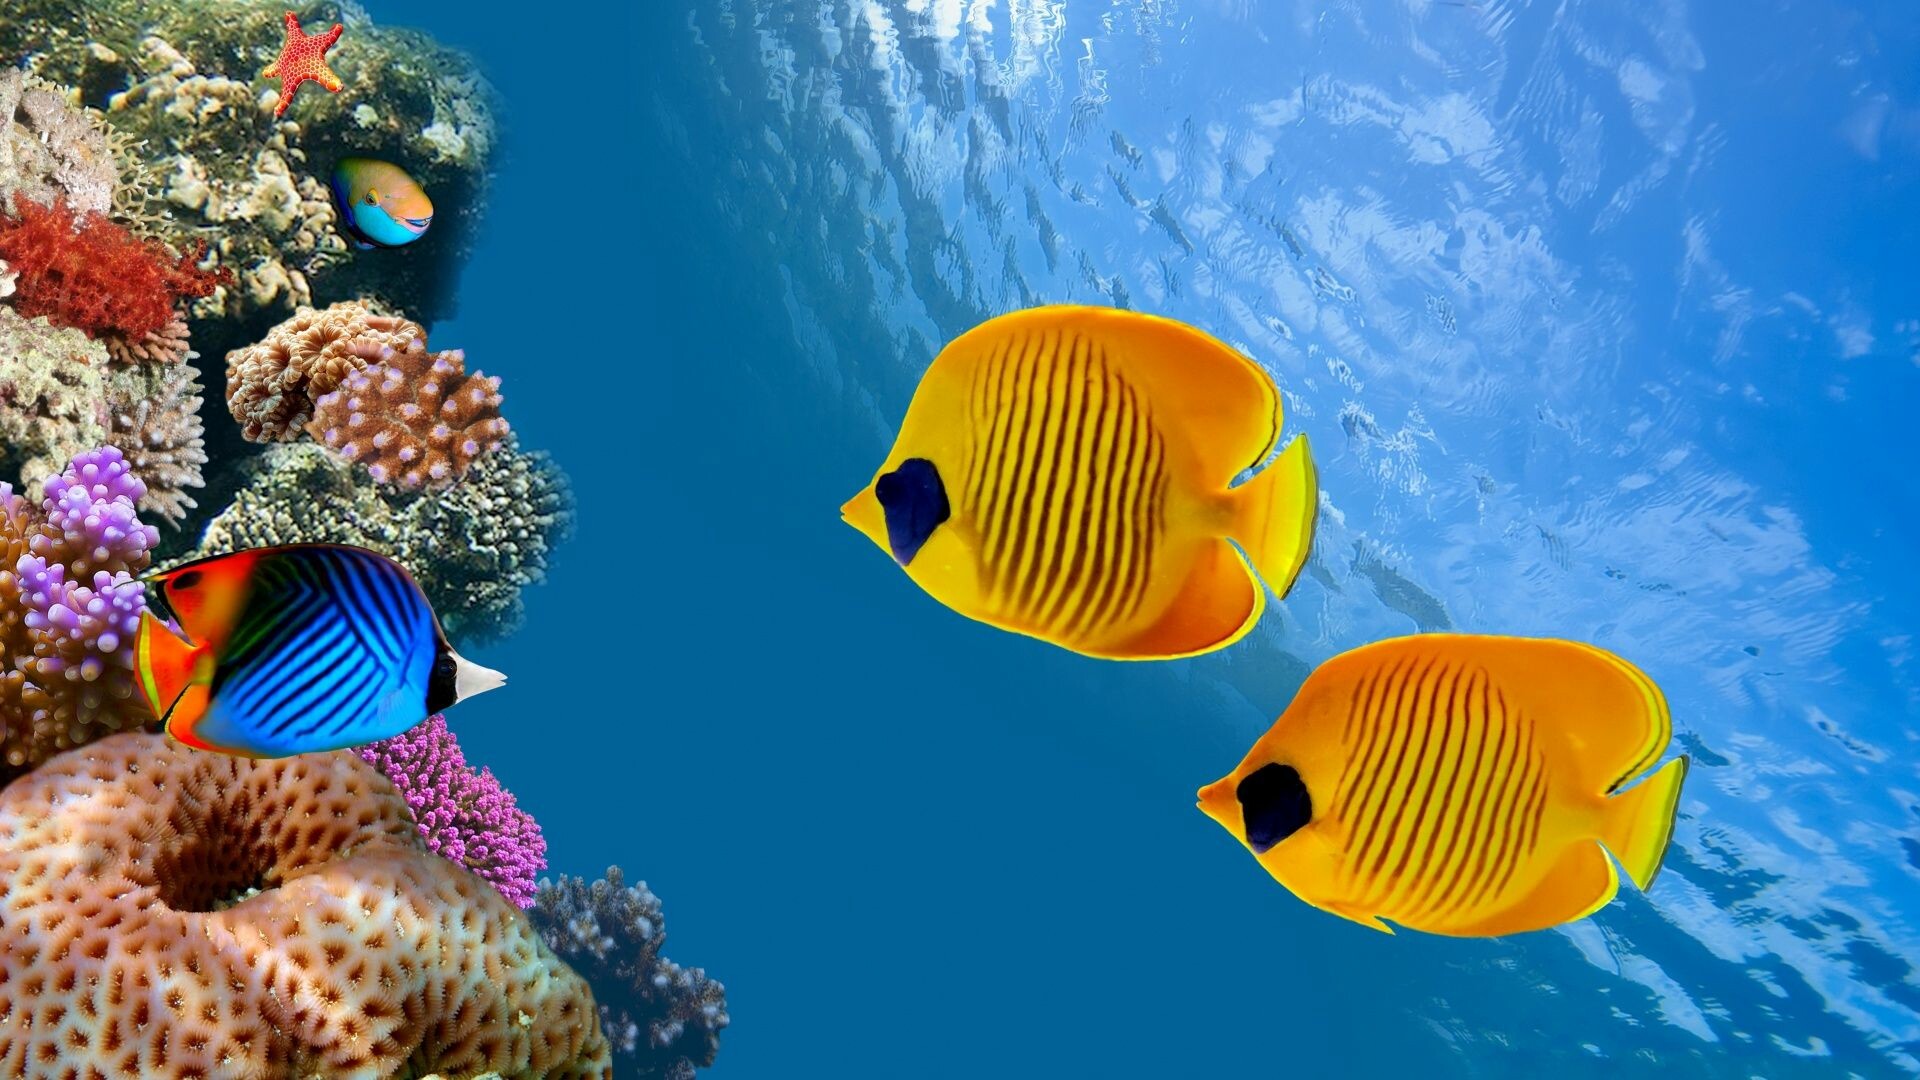 Great Barrier Reef: GBR, Known for an extraordinary variety of marine habitats. 1920x1080 Full HD Background.